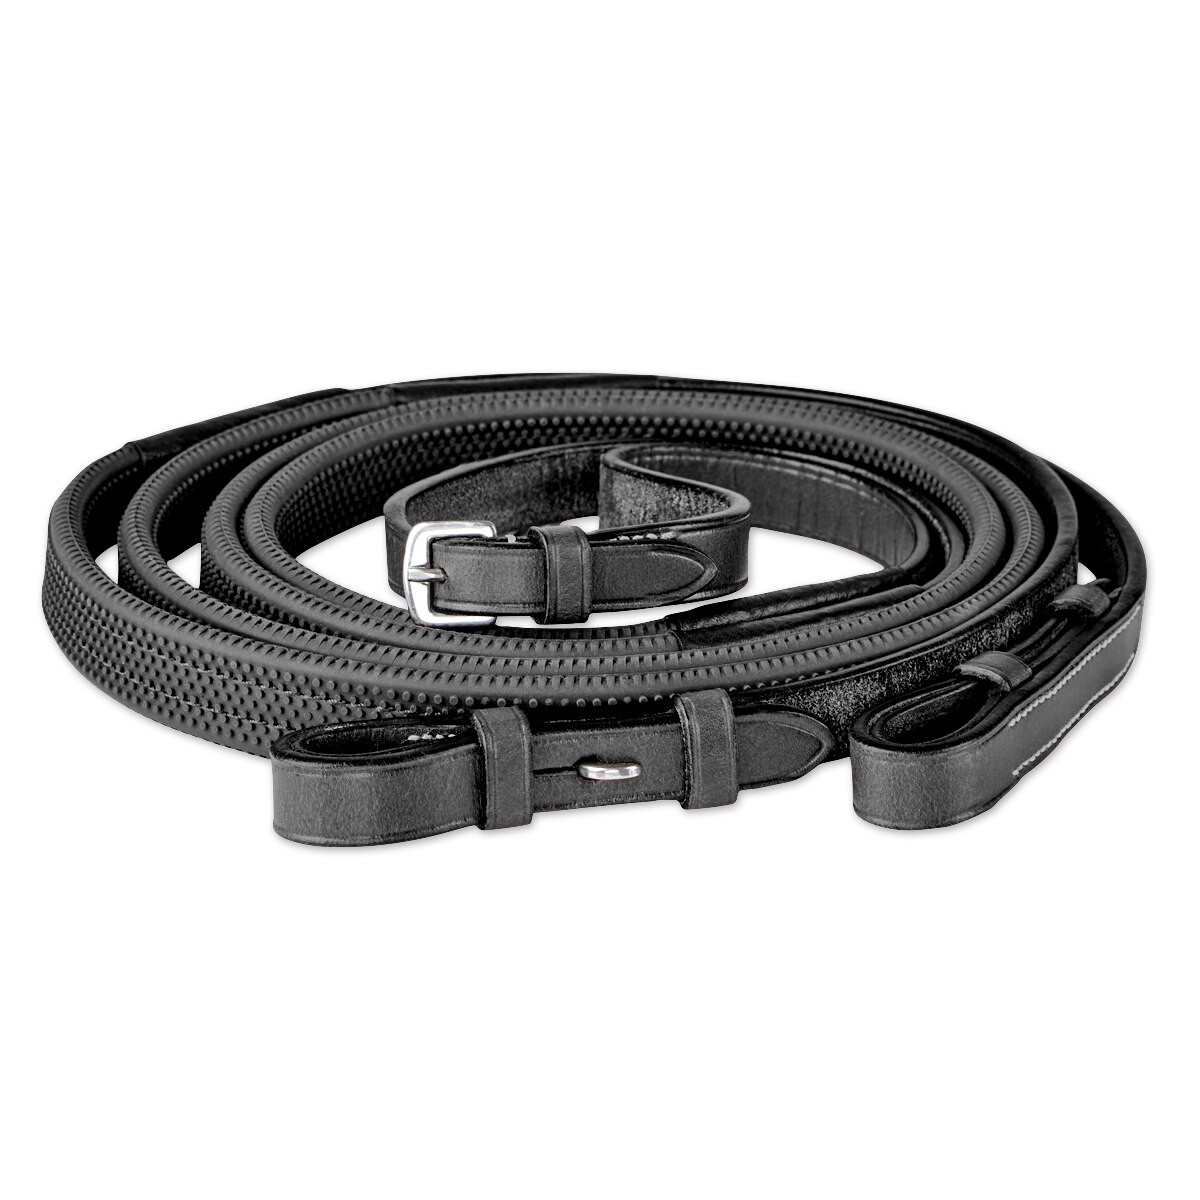 NEW ENGLISH BLACK RUBBER GRIP /RAISED LEATHER REINS 54 INCHES LONG 